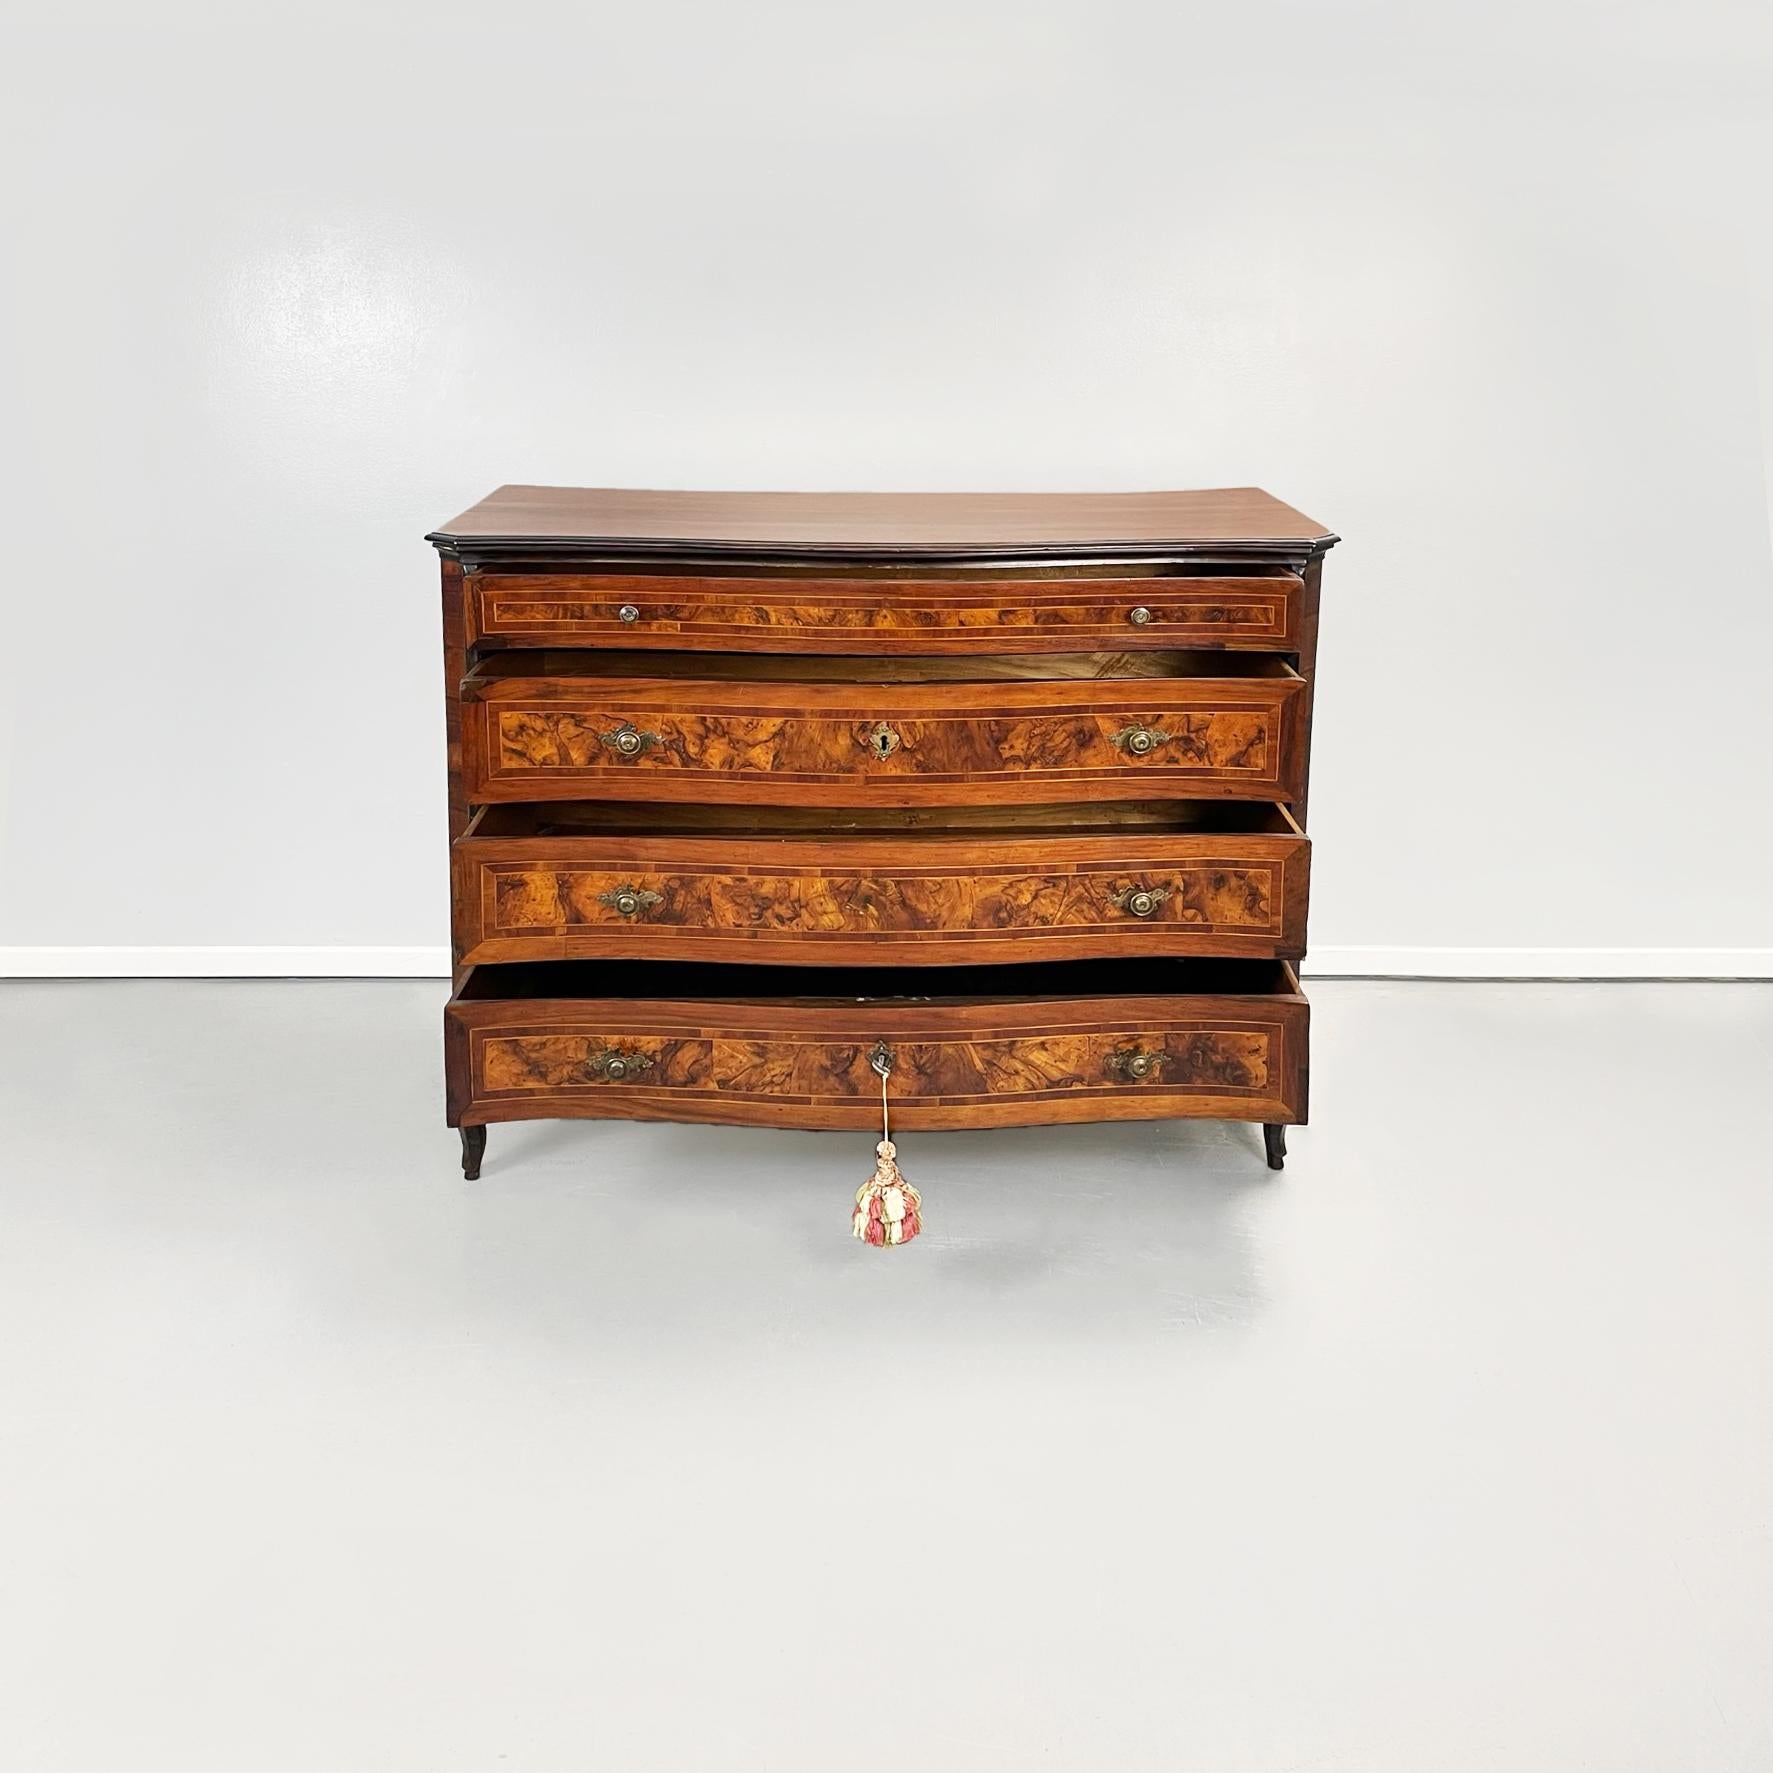 Baroque Italian baroque chests of drawers in wood and metal, 1730-1740s For Sale